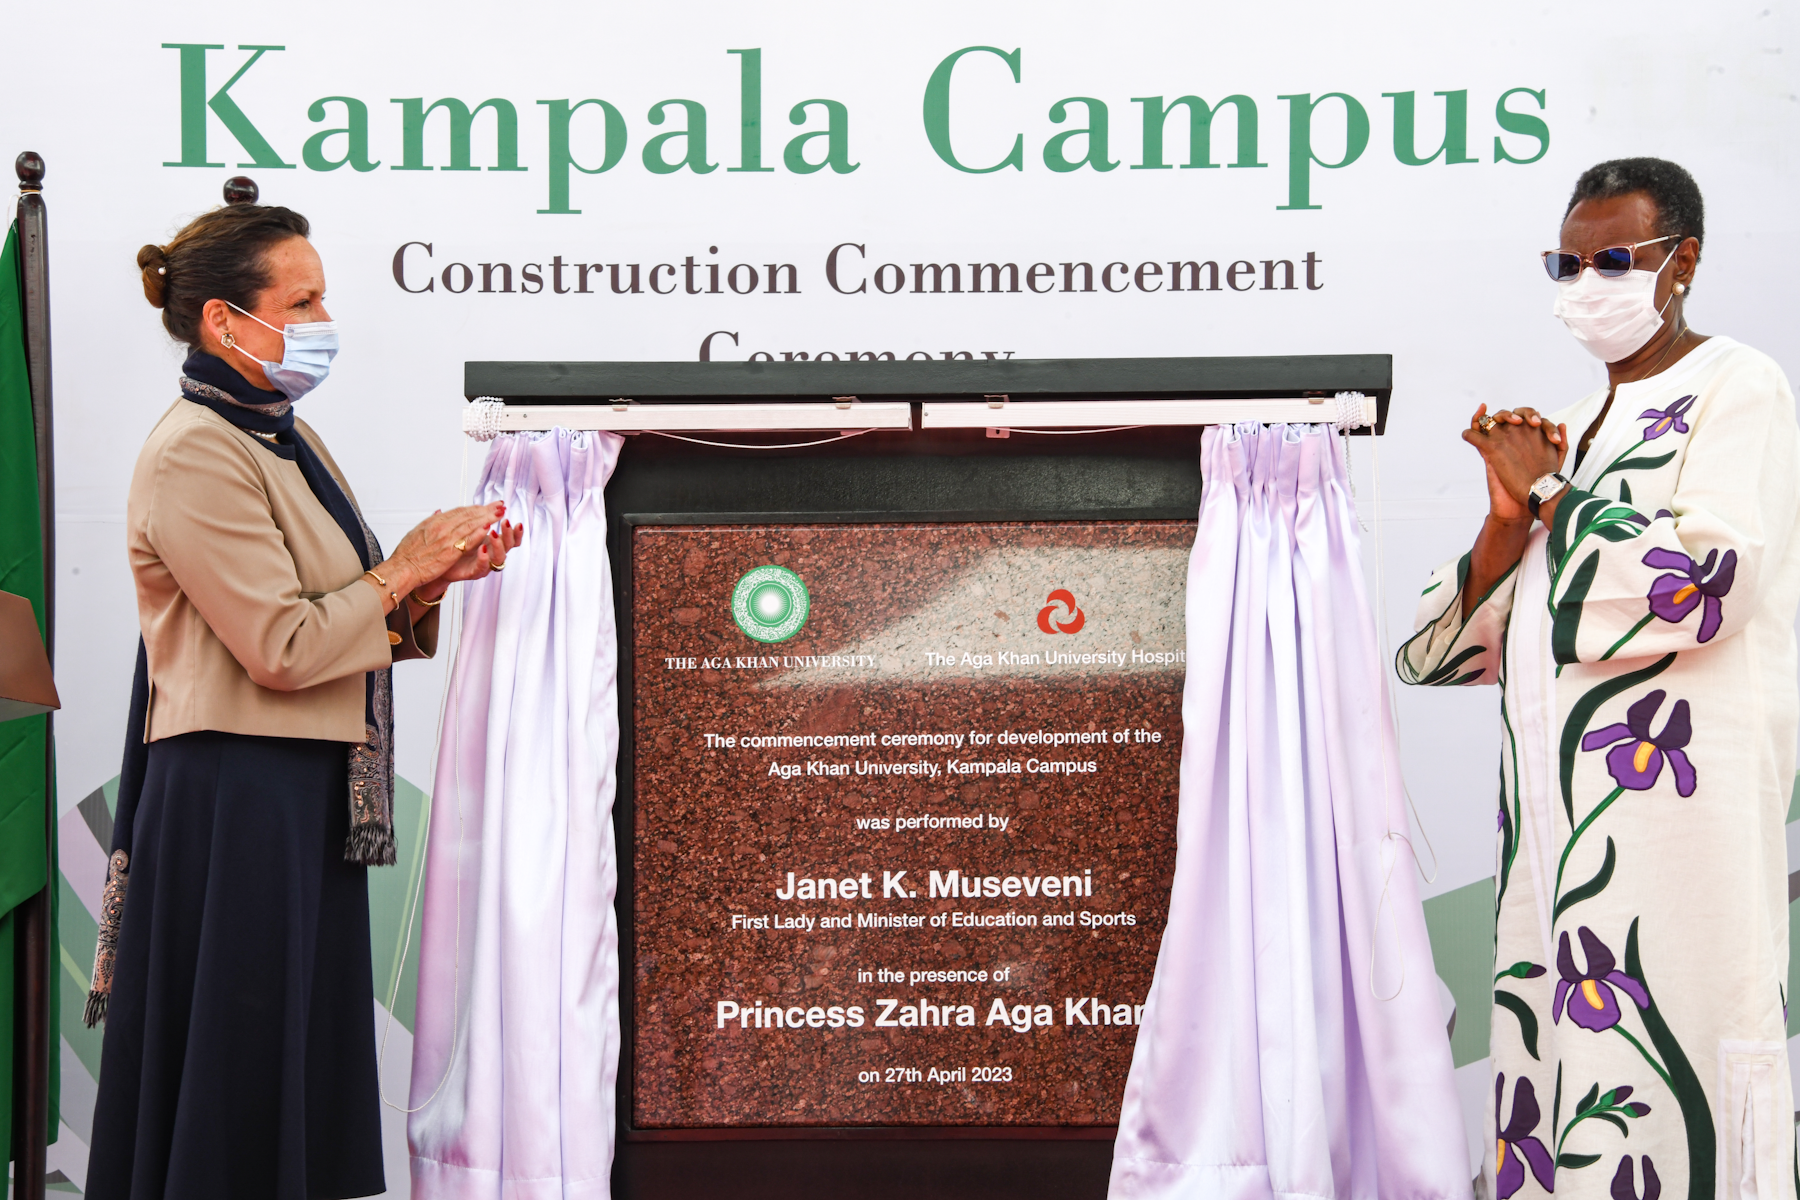 Princess Zahra Aga Khan and The Honourable Janet K. Museveni, First Lady of Uganda, unveil a plaque commemorating the commencement of construction of the Aga Khan University Kampala campus.